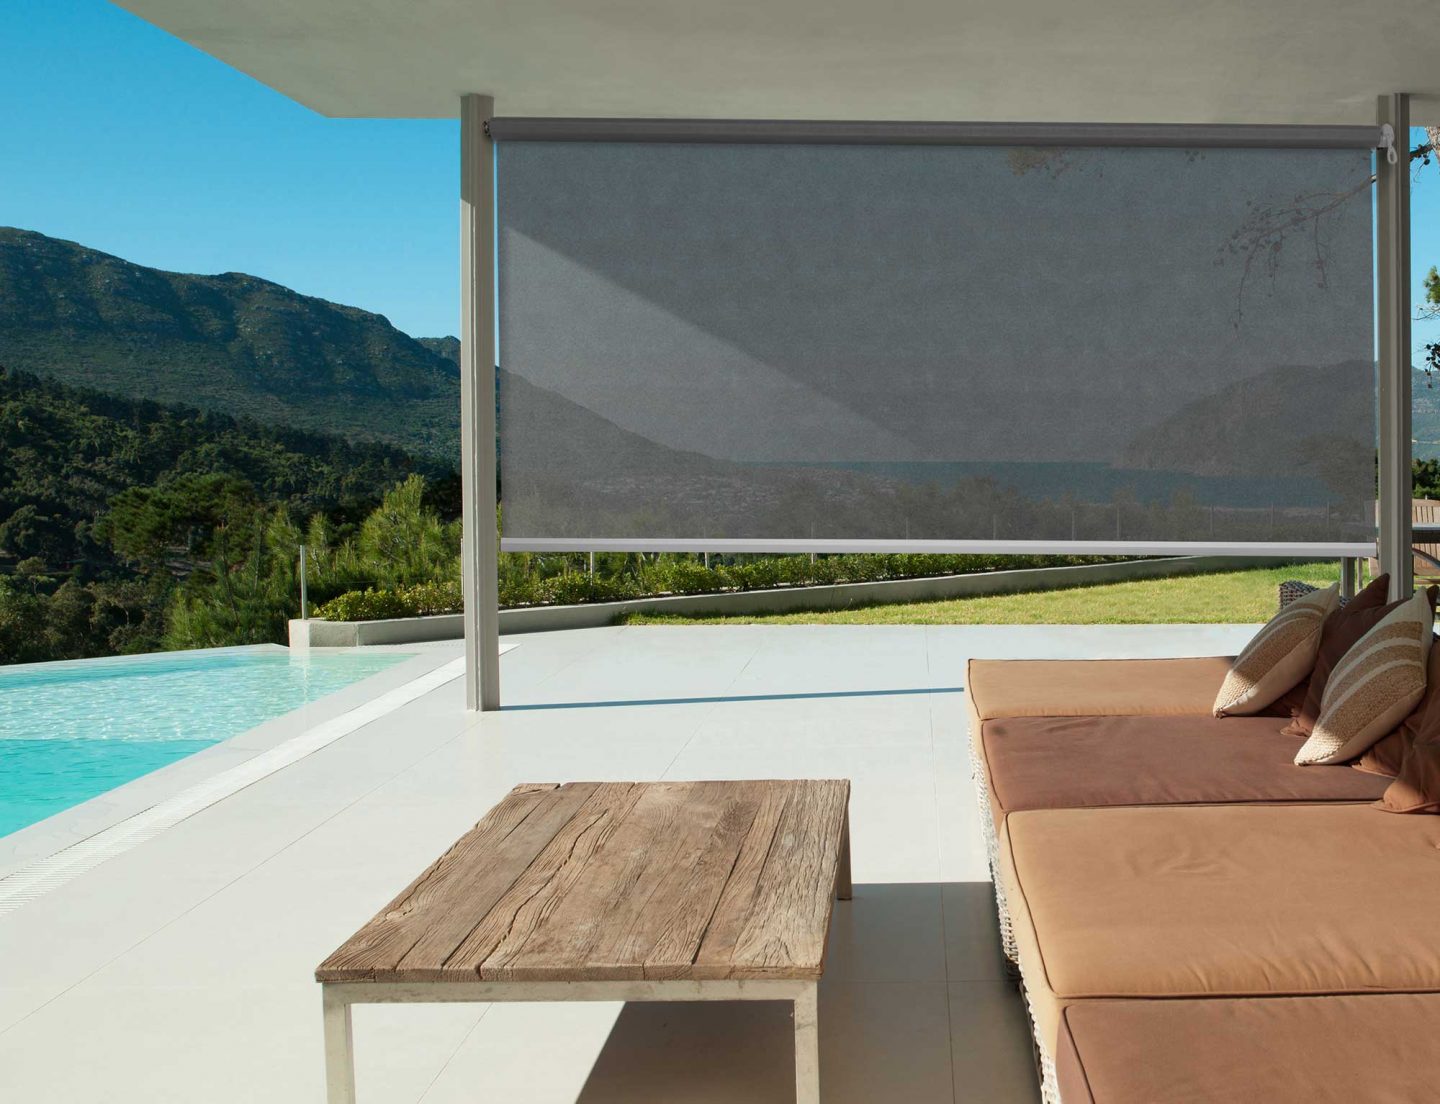 We create versatile, beautiful outdoor spaces that connect seamlessly to homes and gardens, while providing shelter from the elements. As innovators of outdoor-living solutions in New Zealand for many years, Shade Elements has become an industry leader of awnings, screens and retractable pergolas. Our products respond to our unique environment and help New Zealanders to enjoy and enhance the courtyards, sheltered retreats and outdoor rooms that have become part of our country’s contemporary design. Shade Elements’ spaces are harmonious spaces in which to relax and entertain. As market leaders, we source the best, most innovative products from around the world – including Japan, France, Spain and Australia – to provide quality solutions with longevity in mind.